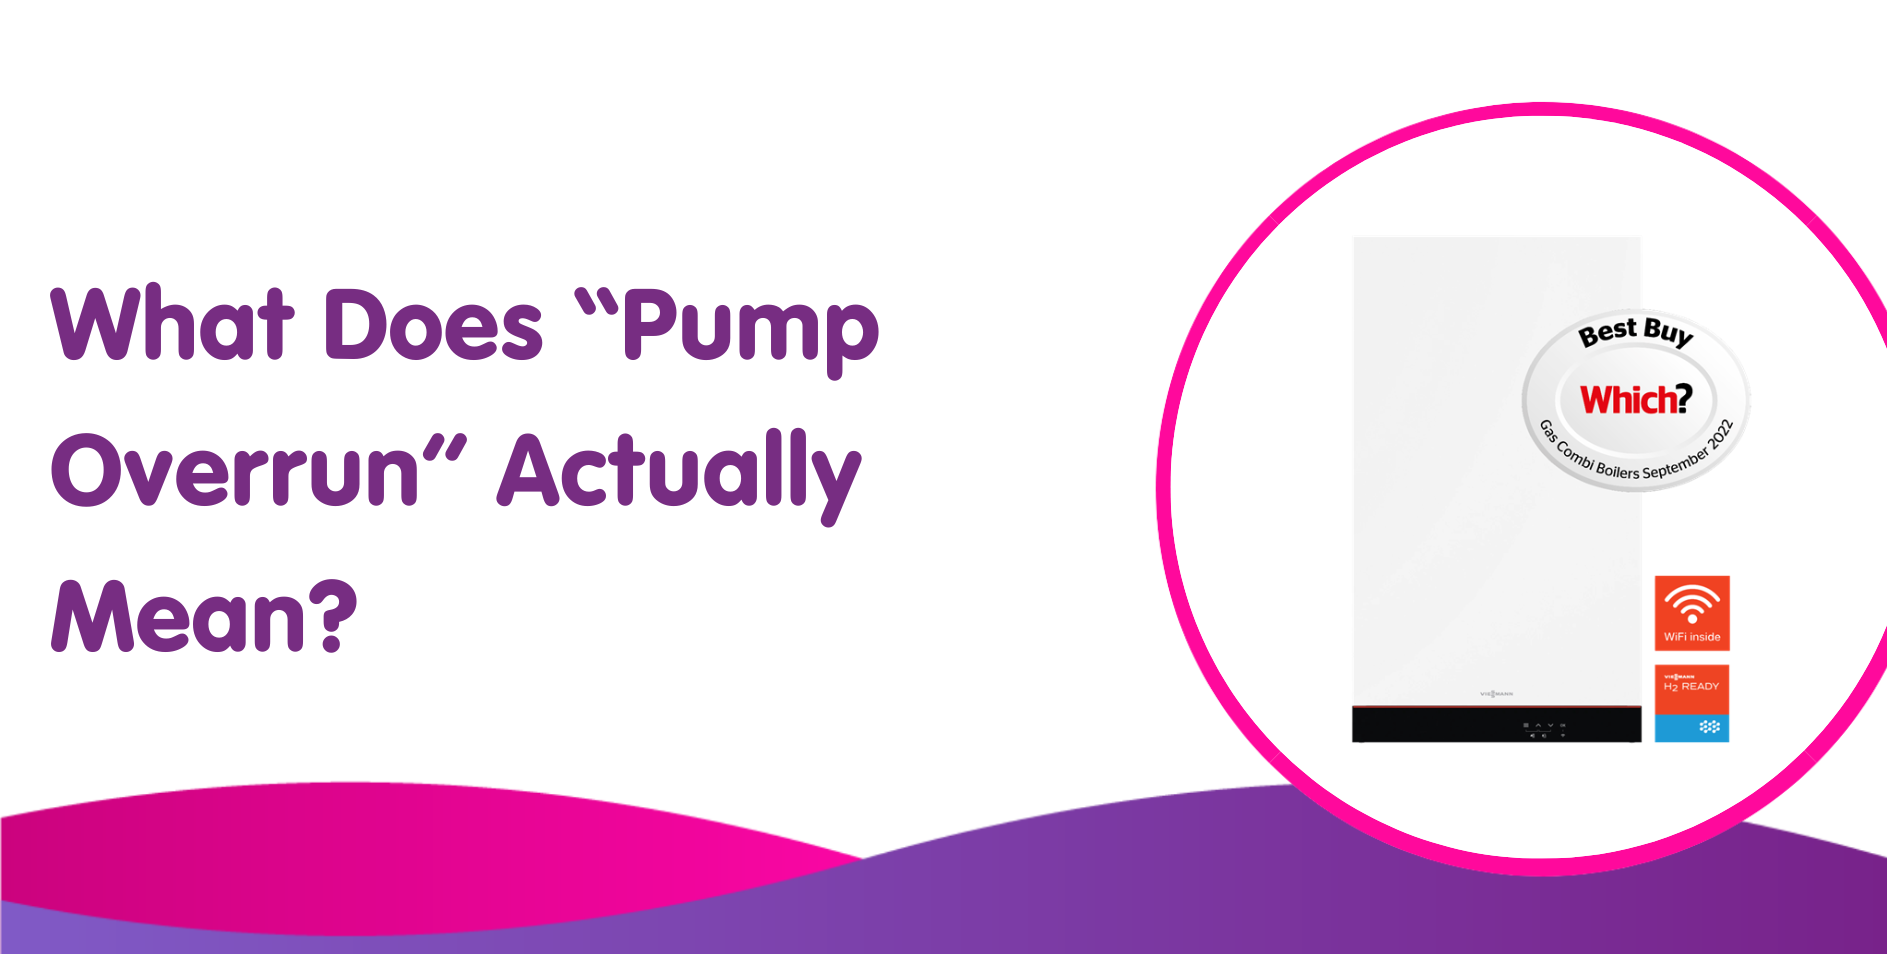 What Does “Pump Overrun” Actually Mean